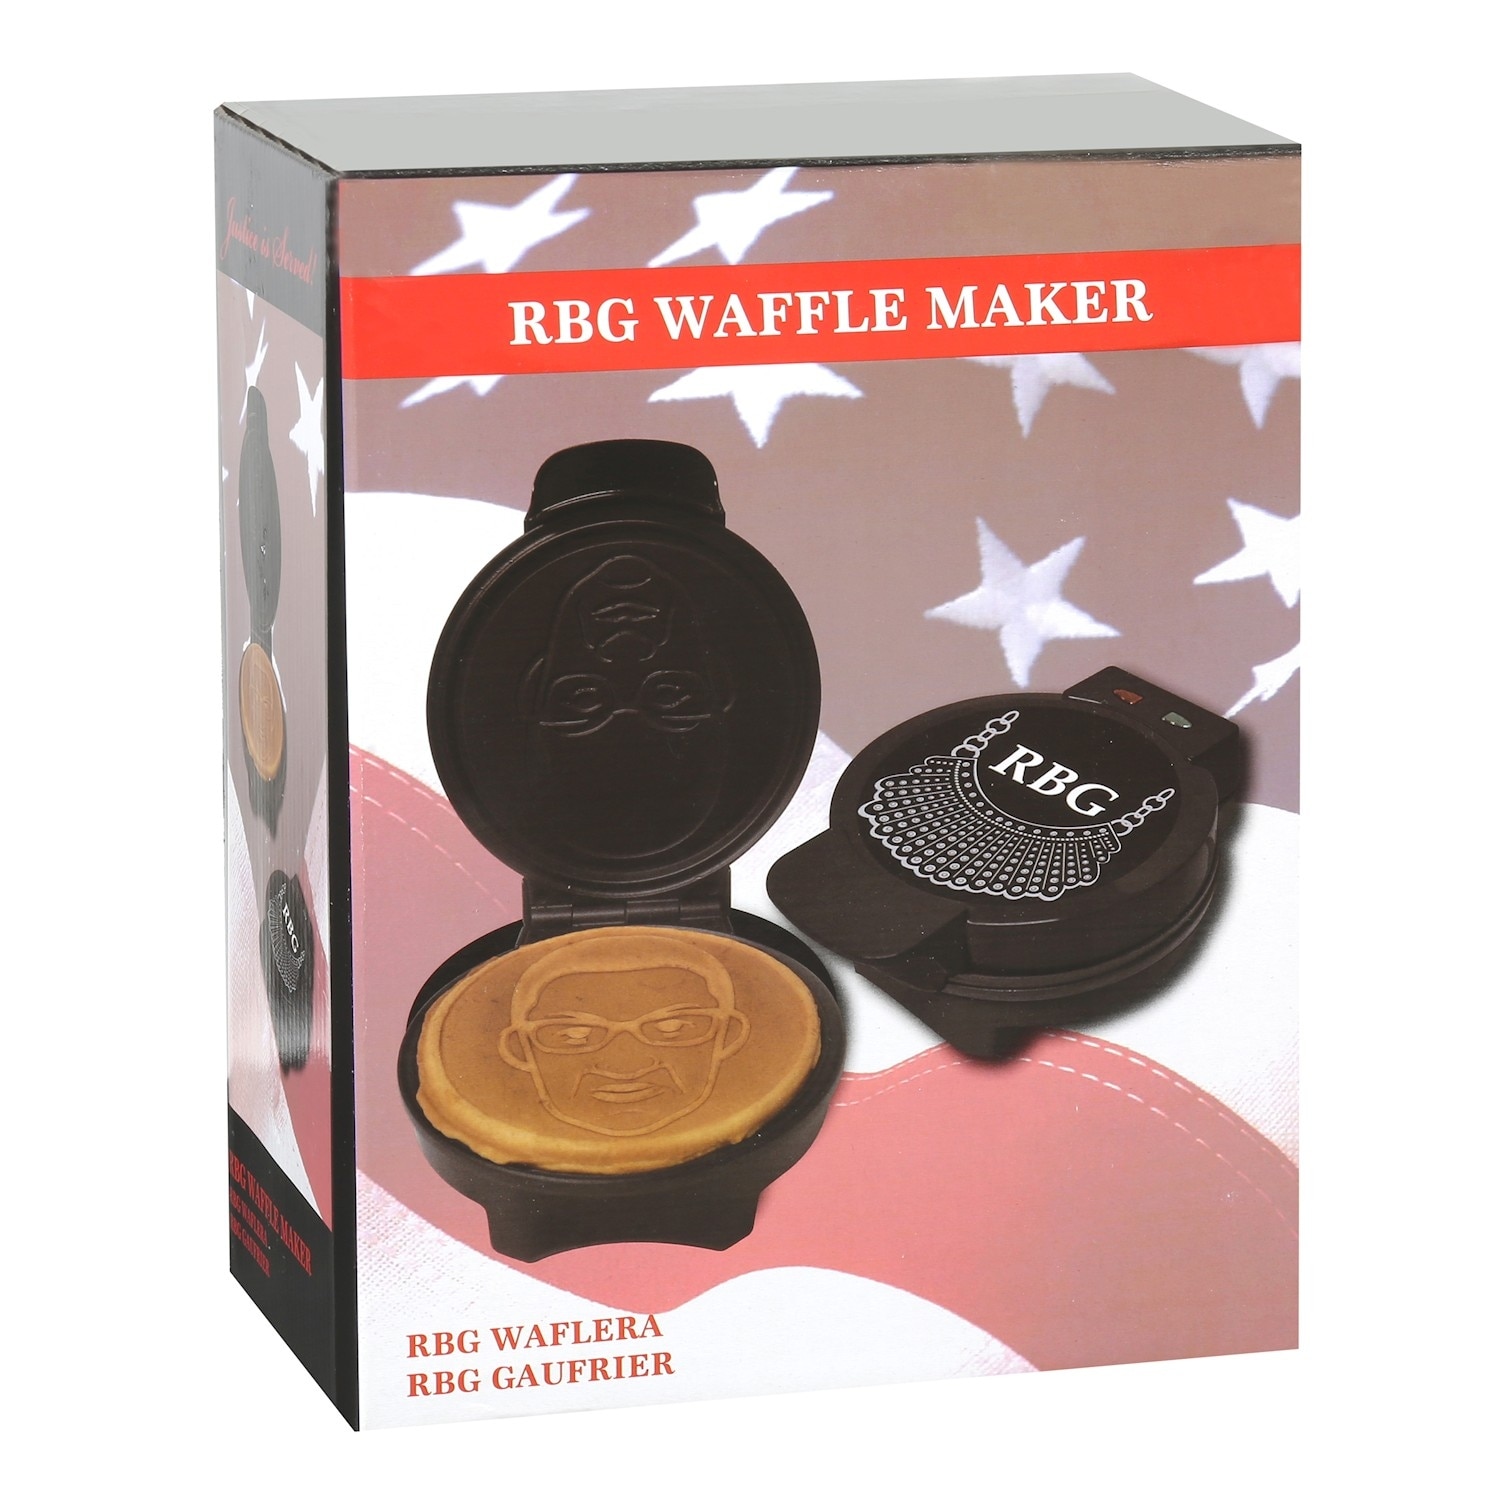 https://ak1.ostkcdn.com/images/products/is/images/direct/866df2482b3c27ee8cda1db87851b943302a8f87/Ruth-Bader-Ginsburg-Waffle-Maker%2C-RBG%27s-Face-on-a-Waffle-Pancake%2C-Waffle-Iron.jpg